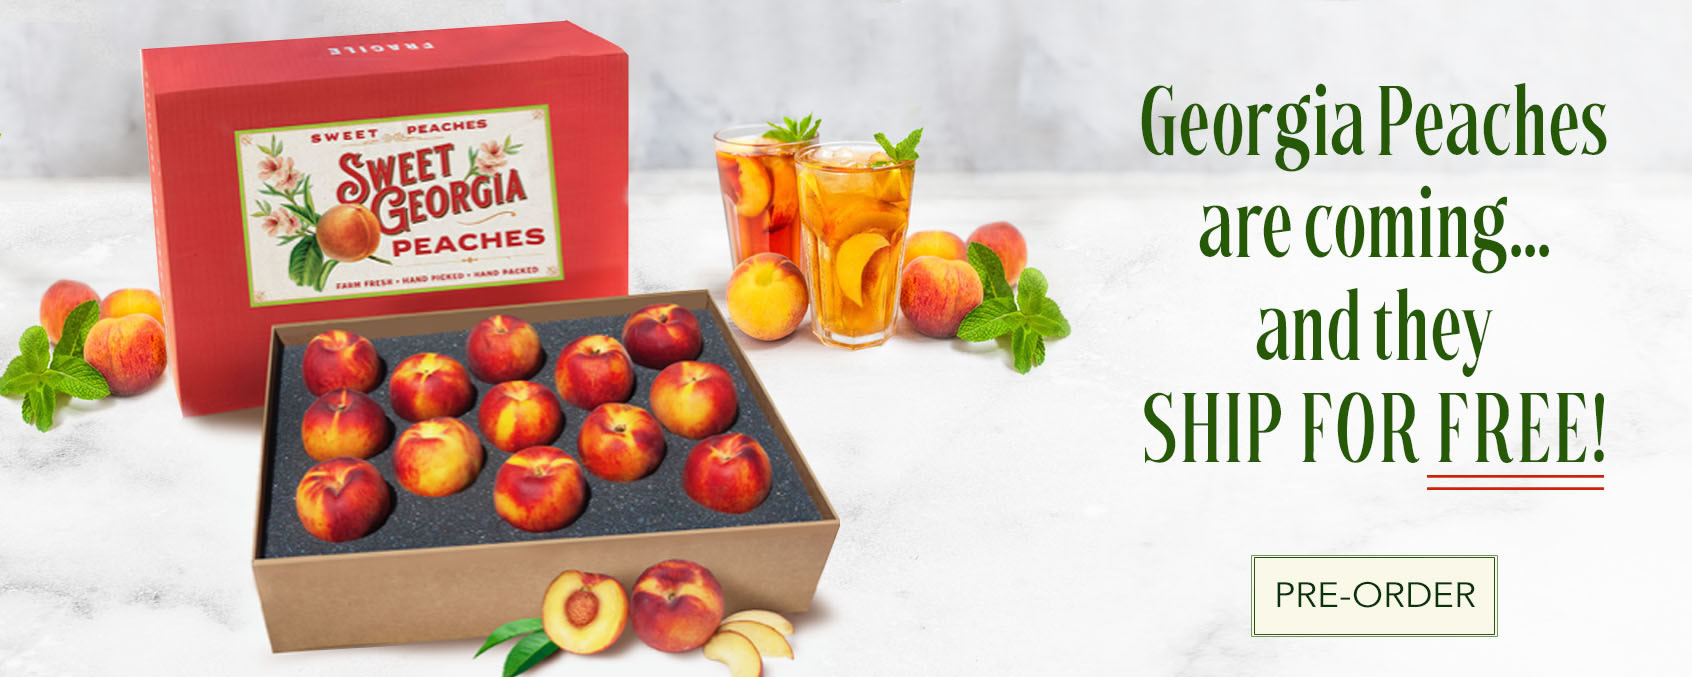 Peaches are coming, Pre-order Today - Ship for FREE